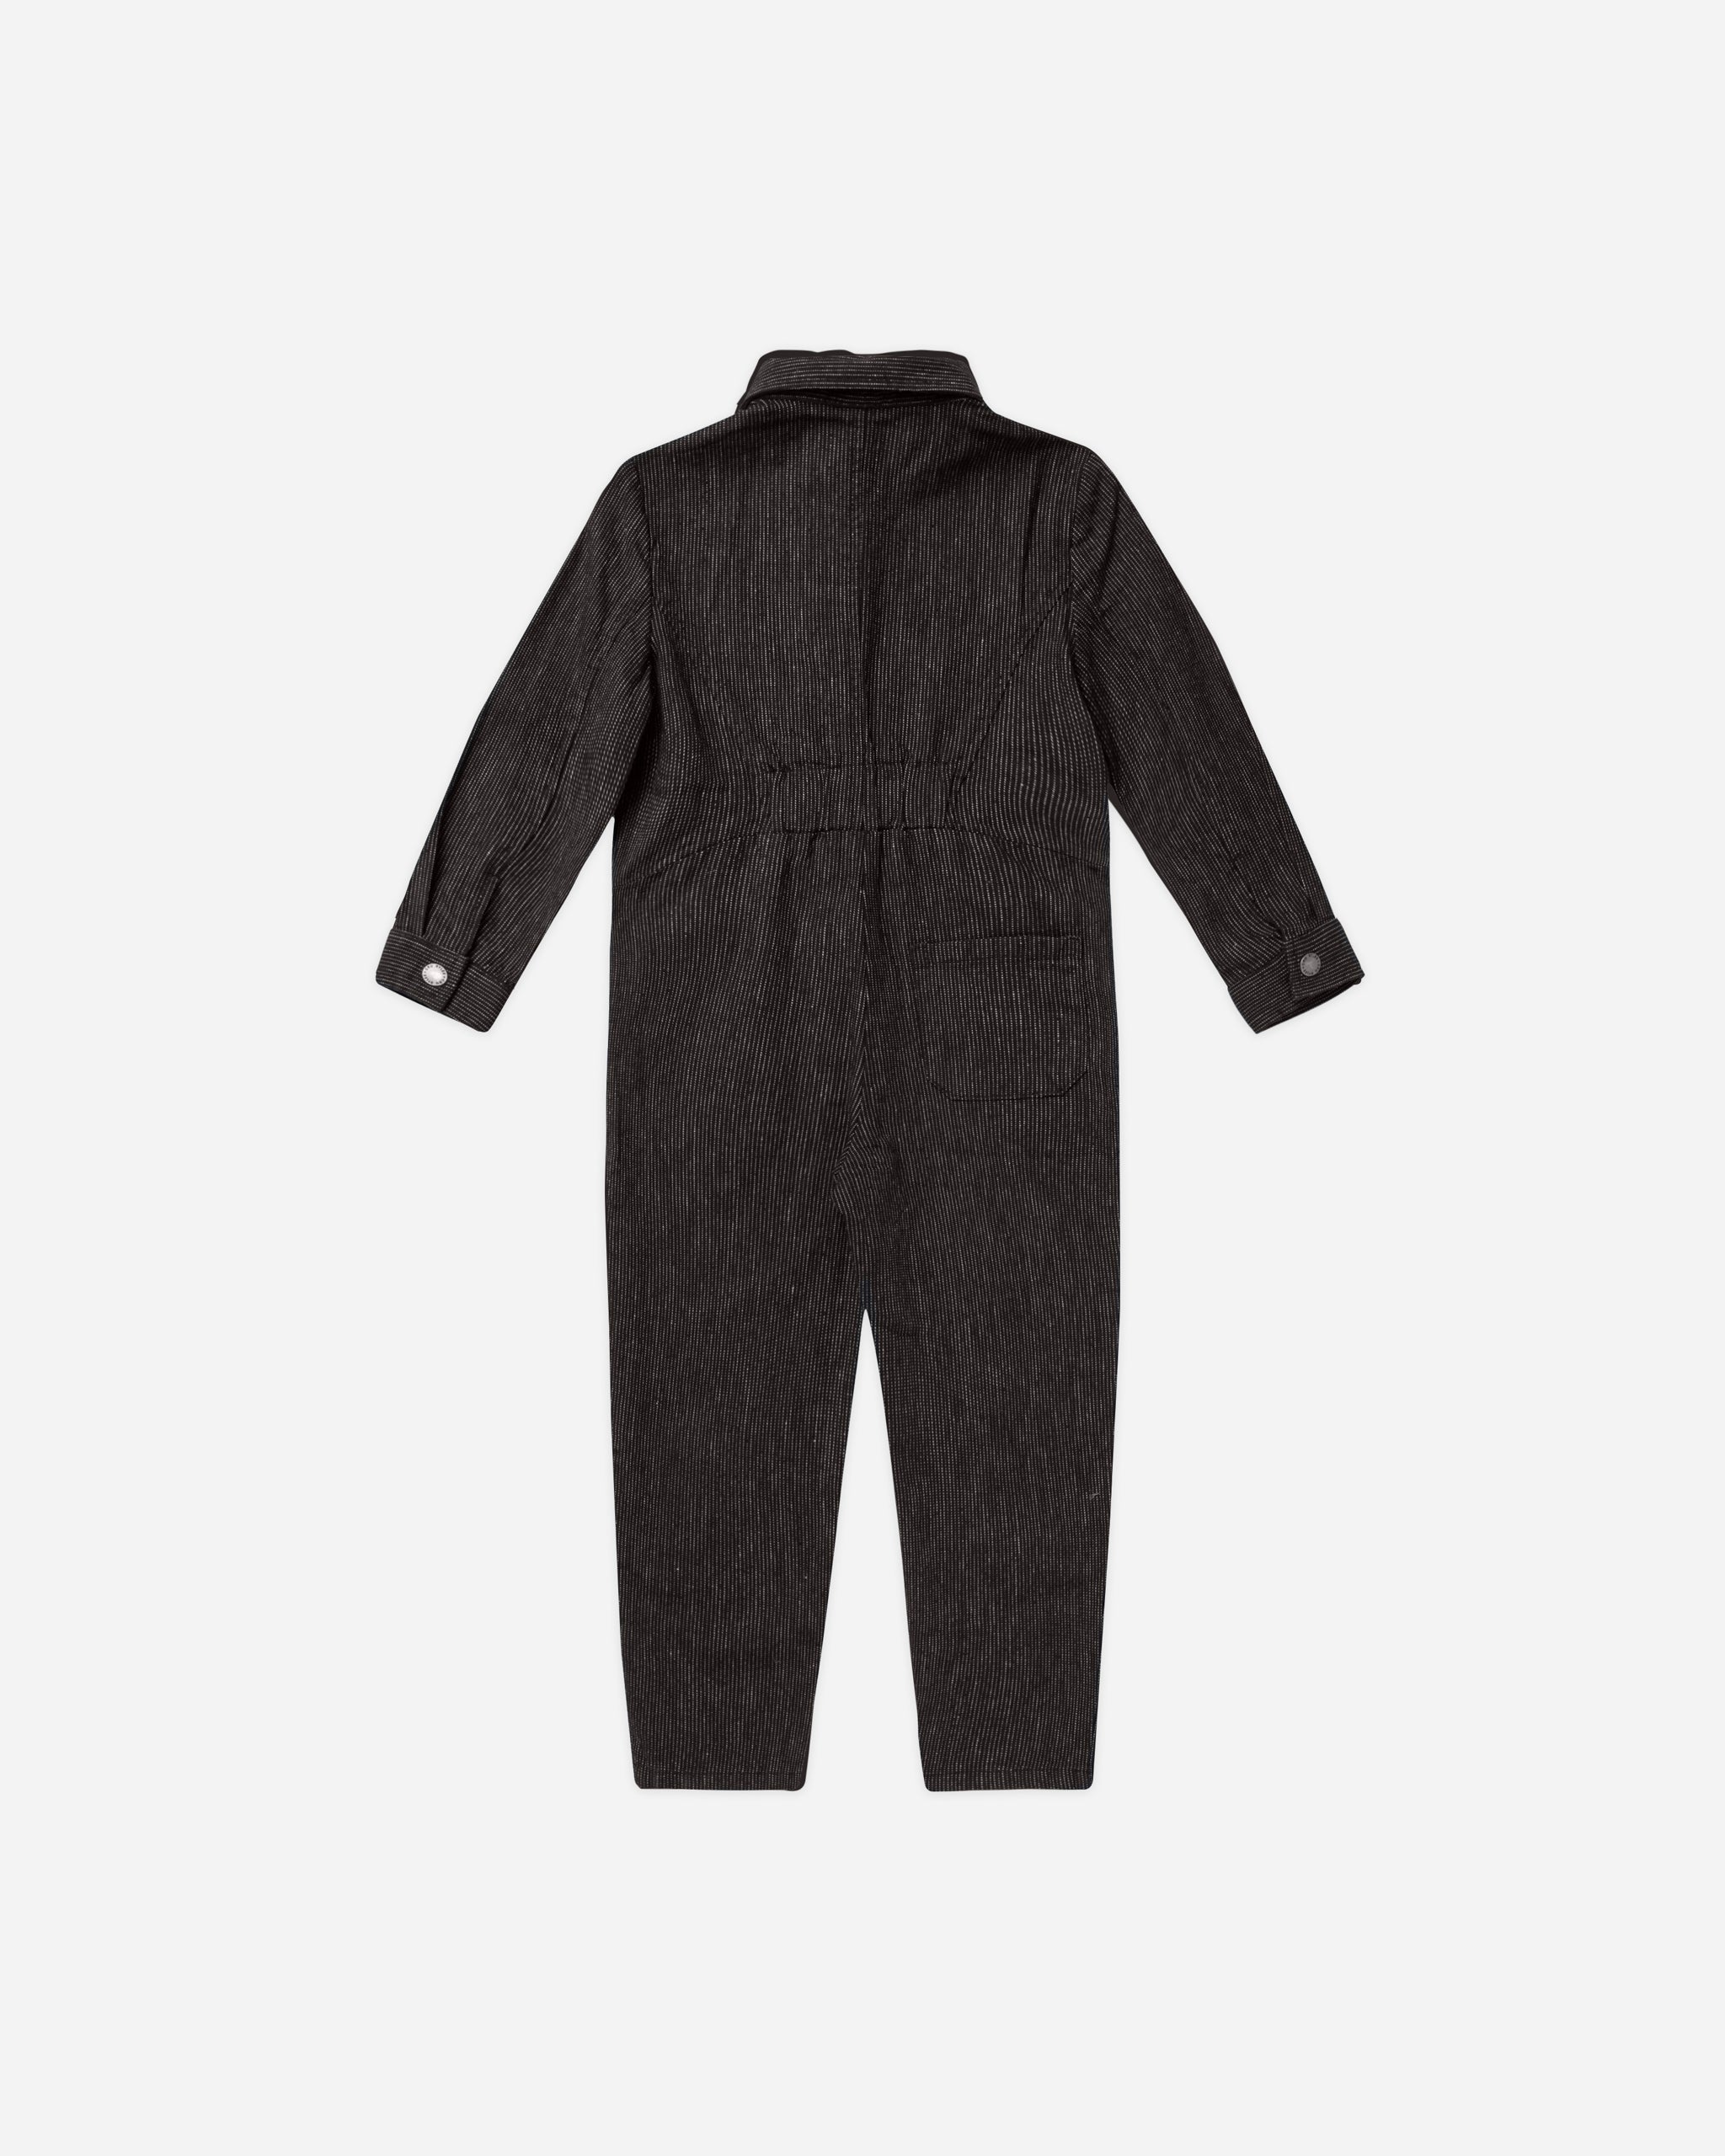 Coverall Jumpsuit || Black - Rylee + Cru | Kids Clothes | Trendy Baby Clothes | Modern Infant Outfits |